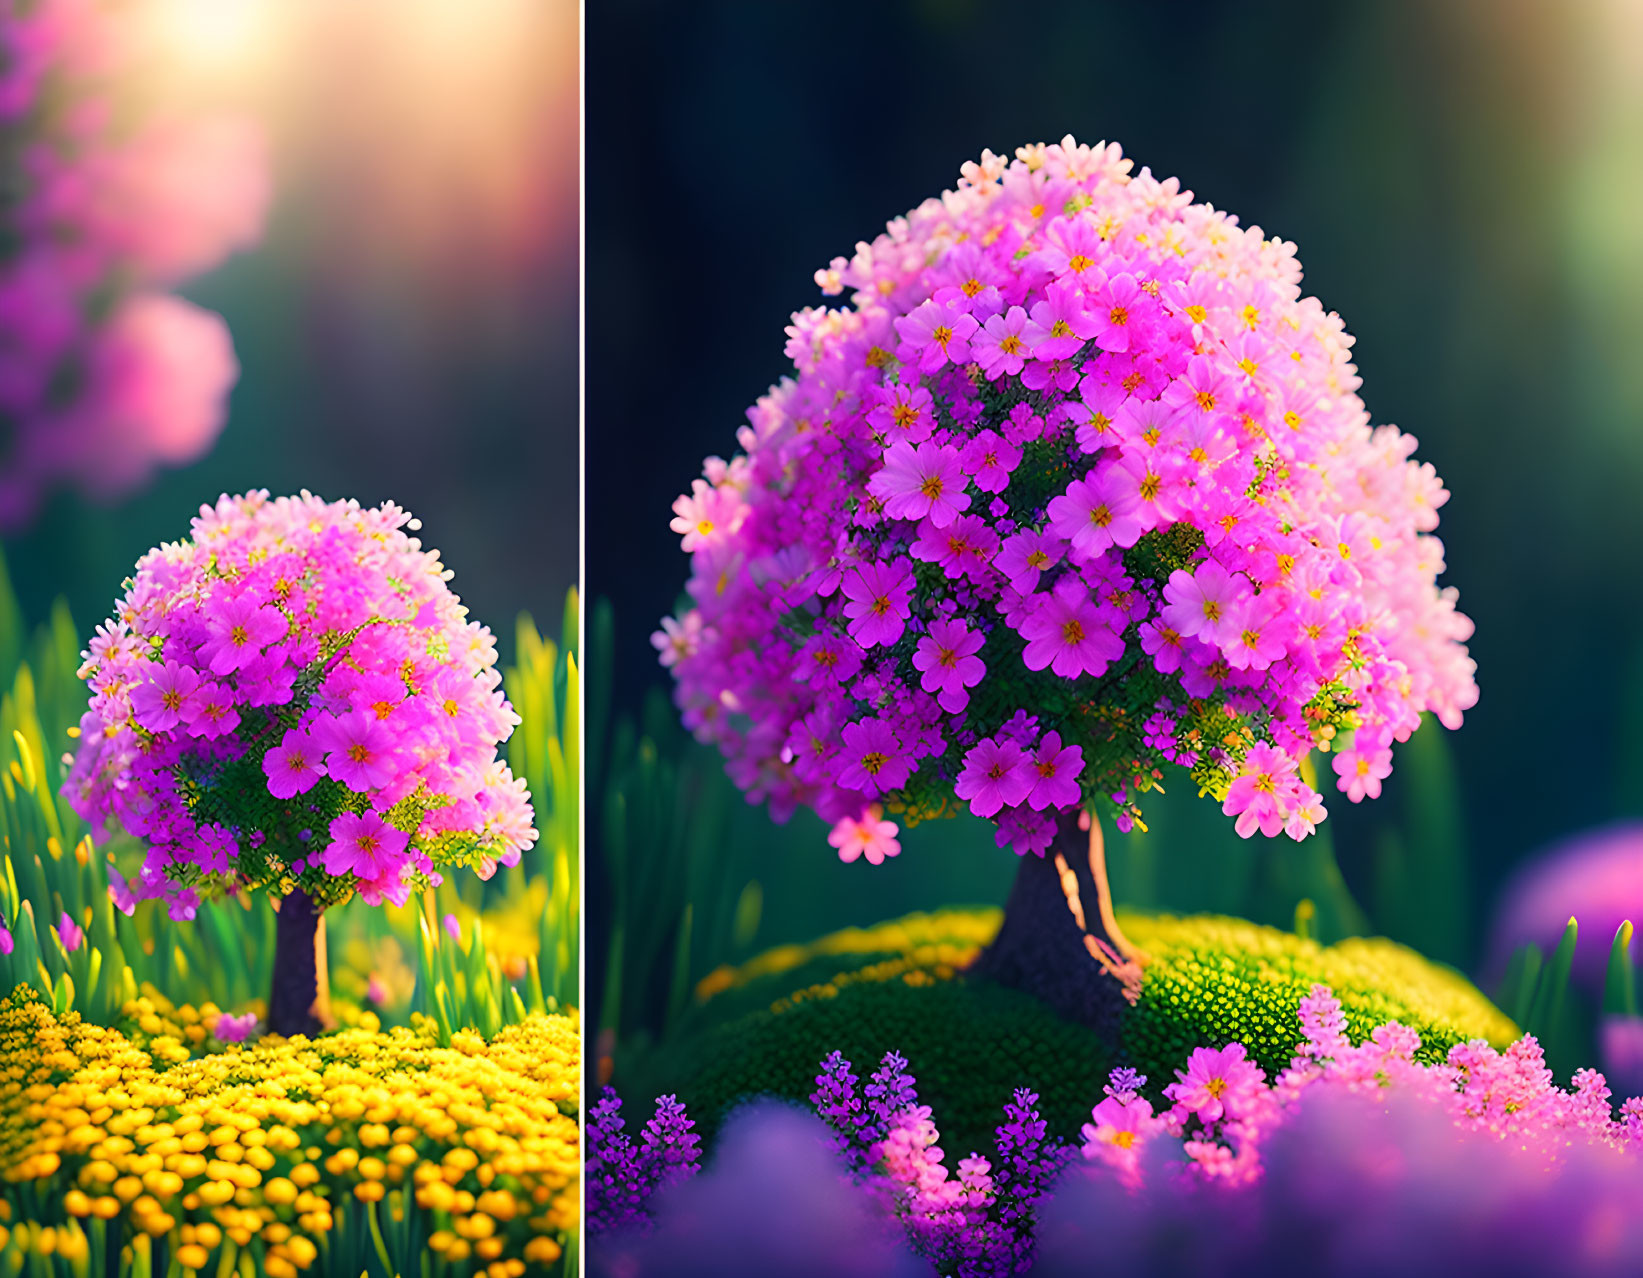 Miniature trees with pink blossoms in vibrant artwork